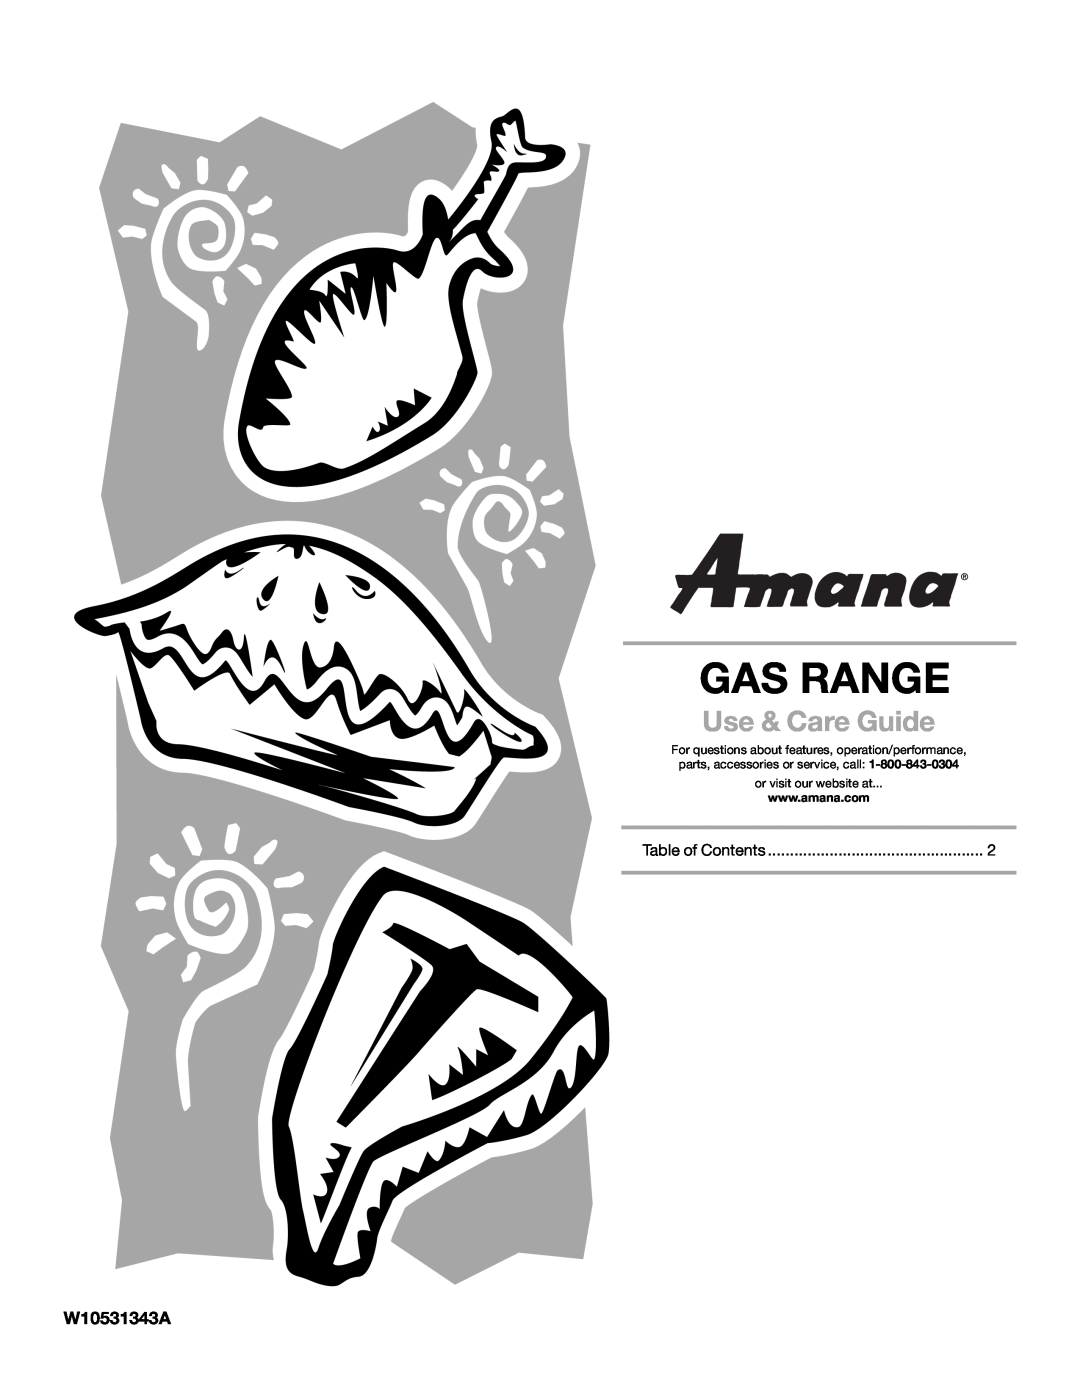 Amana W10531343A manual Gas Range, Use & Care Guide, or visit our website at 